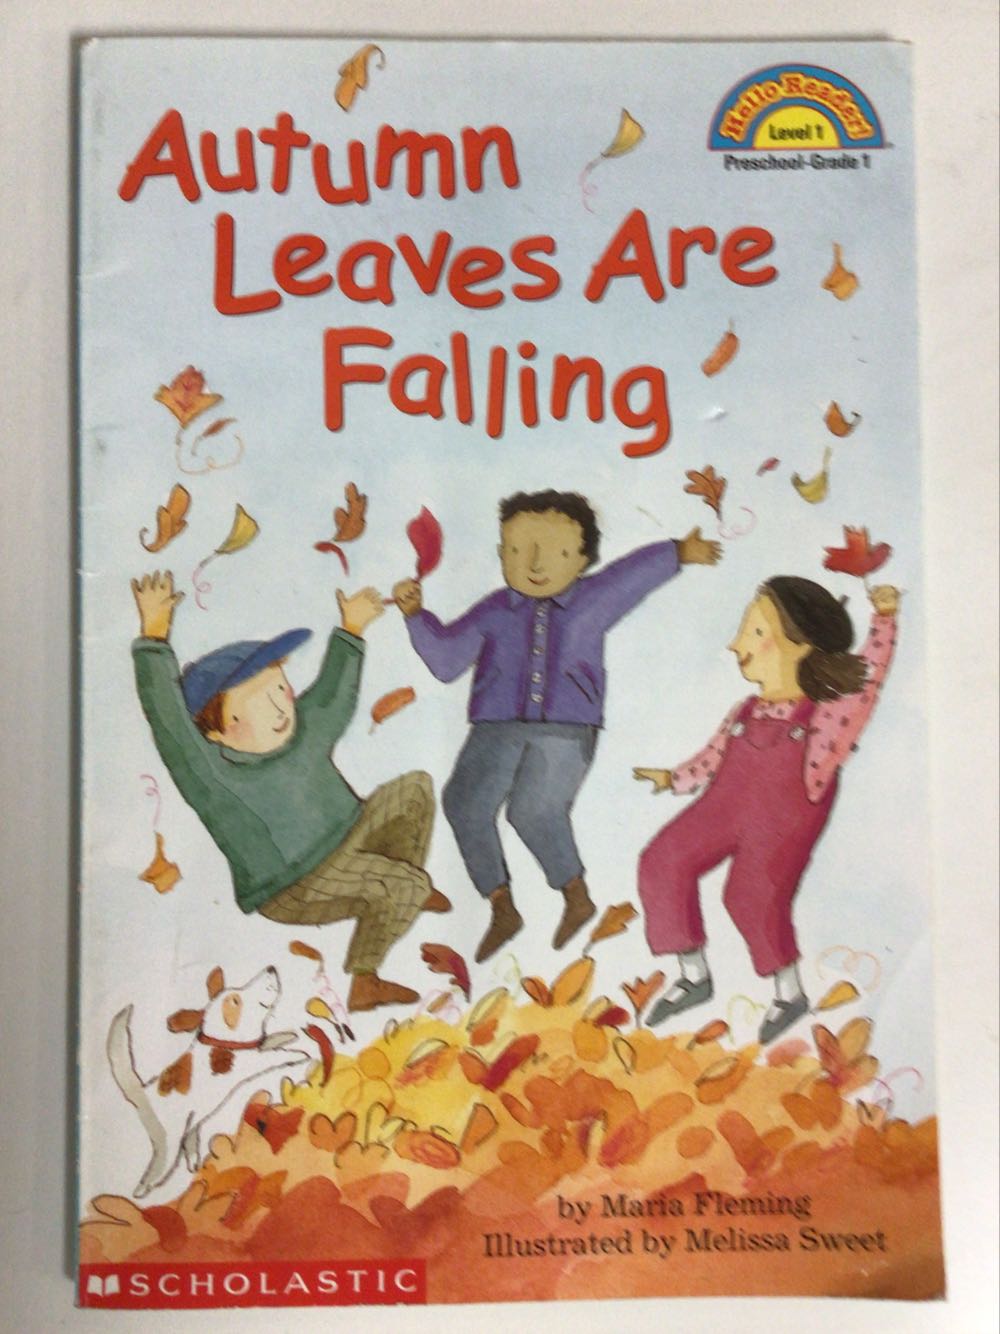 Autumn Leaves Are Falling - Maria Fleming (Scholastic, Inc. - Paperback) book collectible [Barcode 9780439200615] - Main Image 1